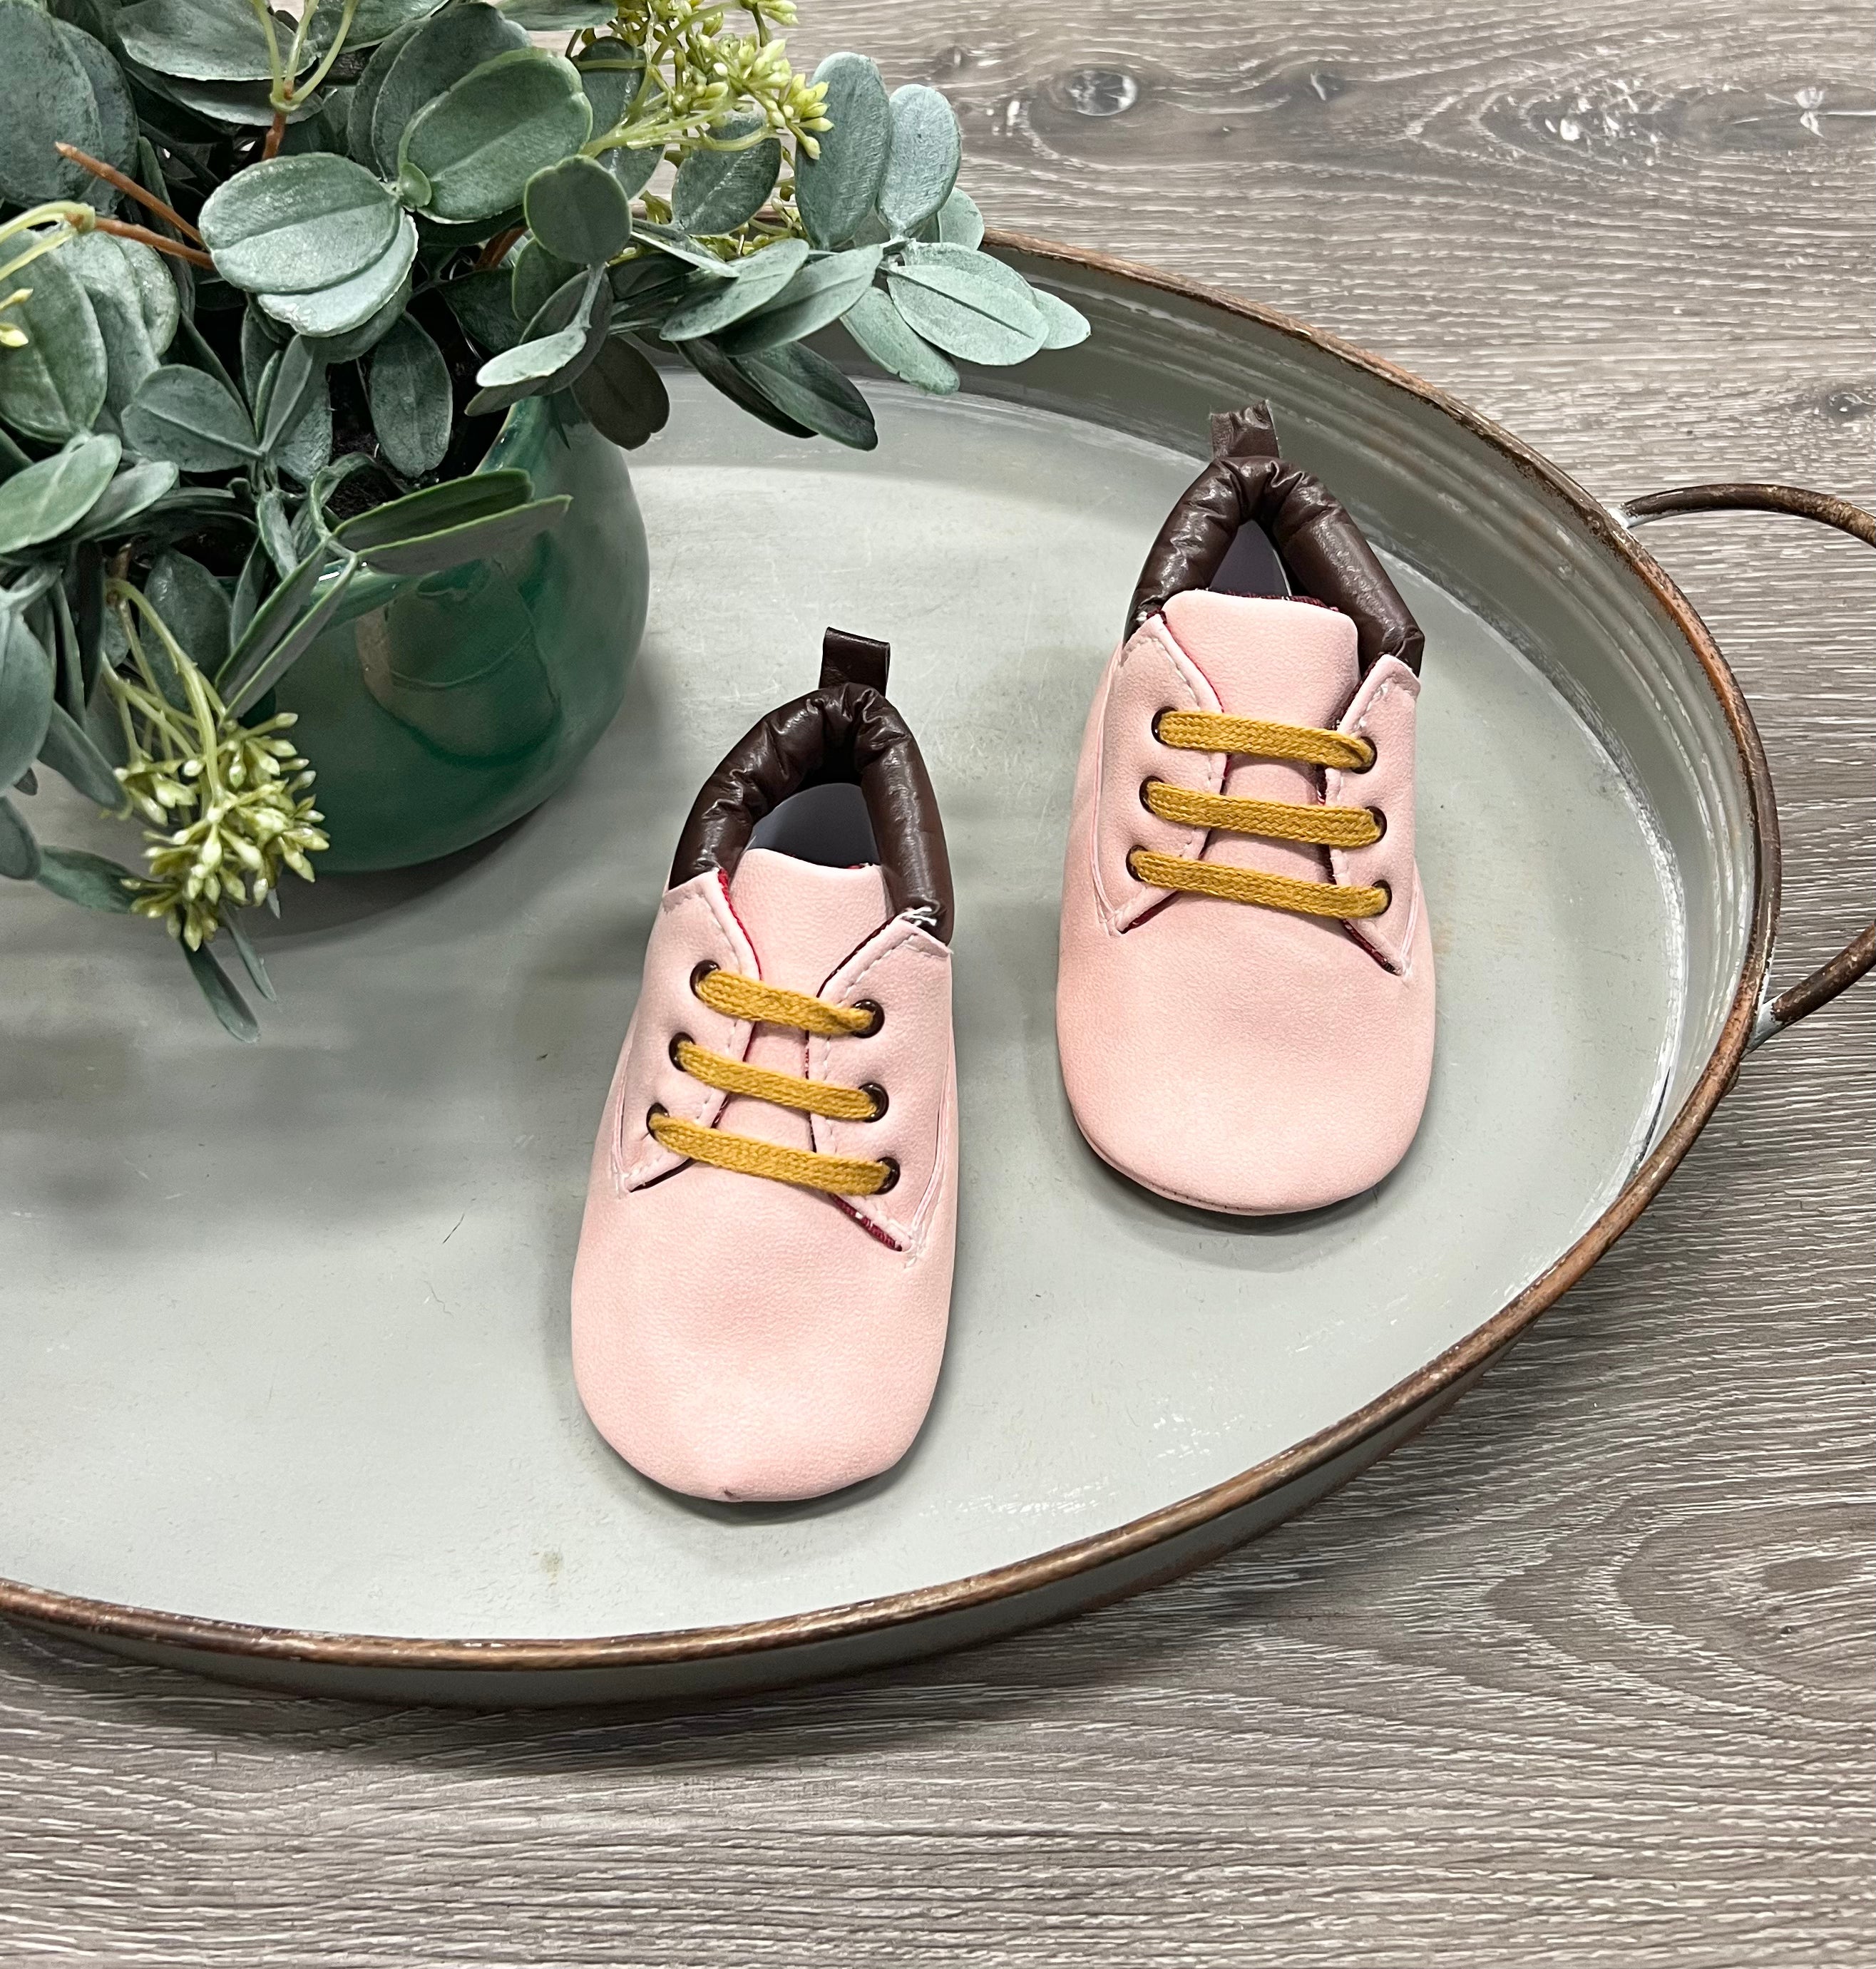 Baby Fashion Shoes